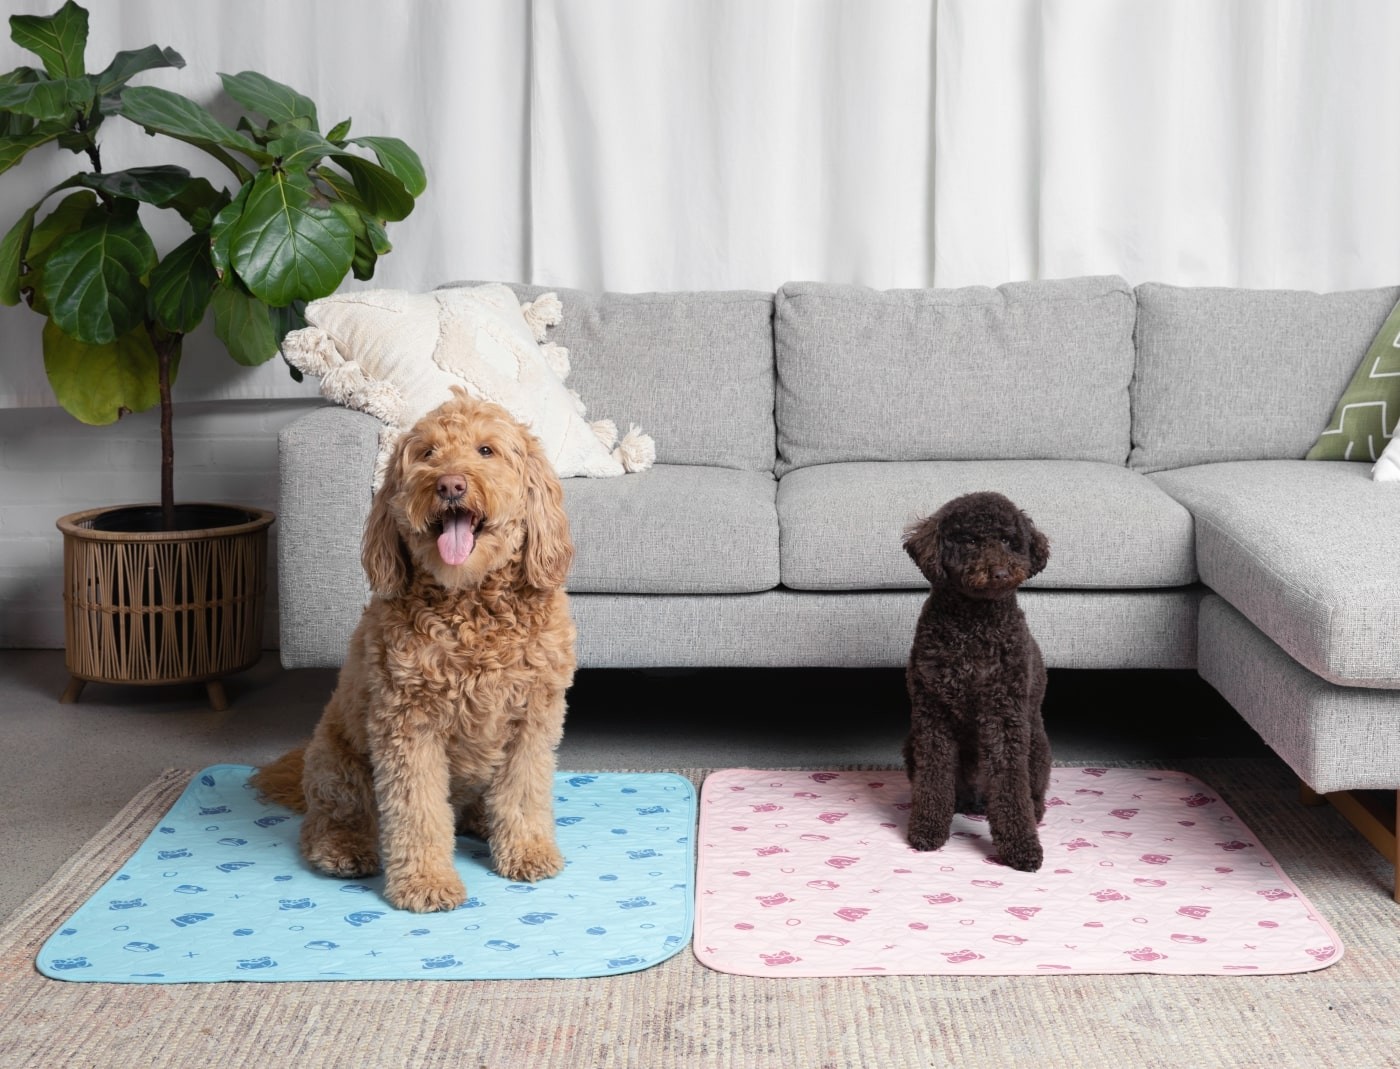 Two small dogs sitting on reusable potty pads on the carpet